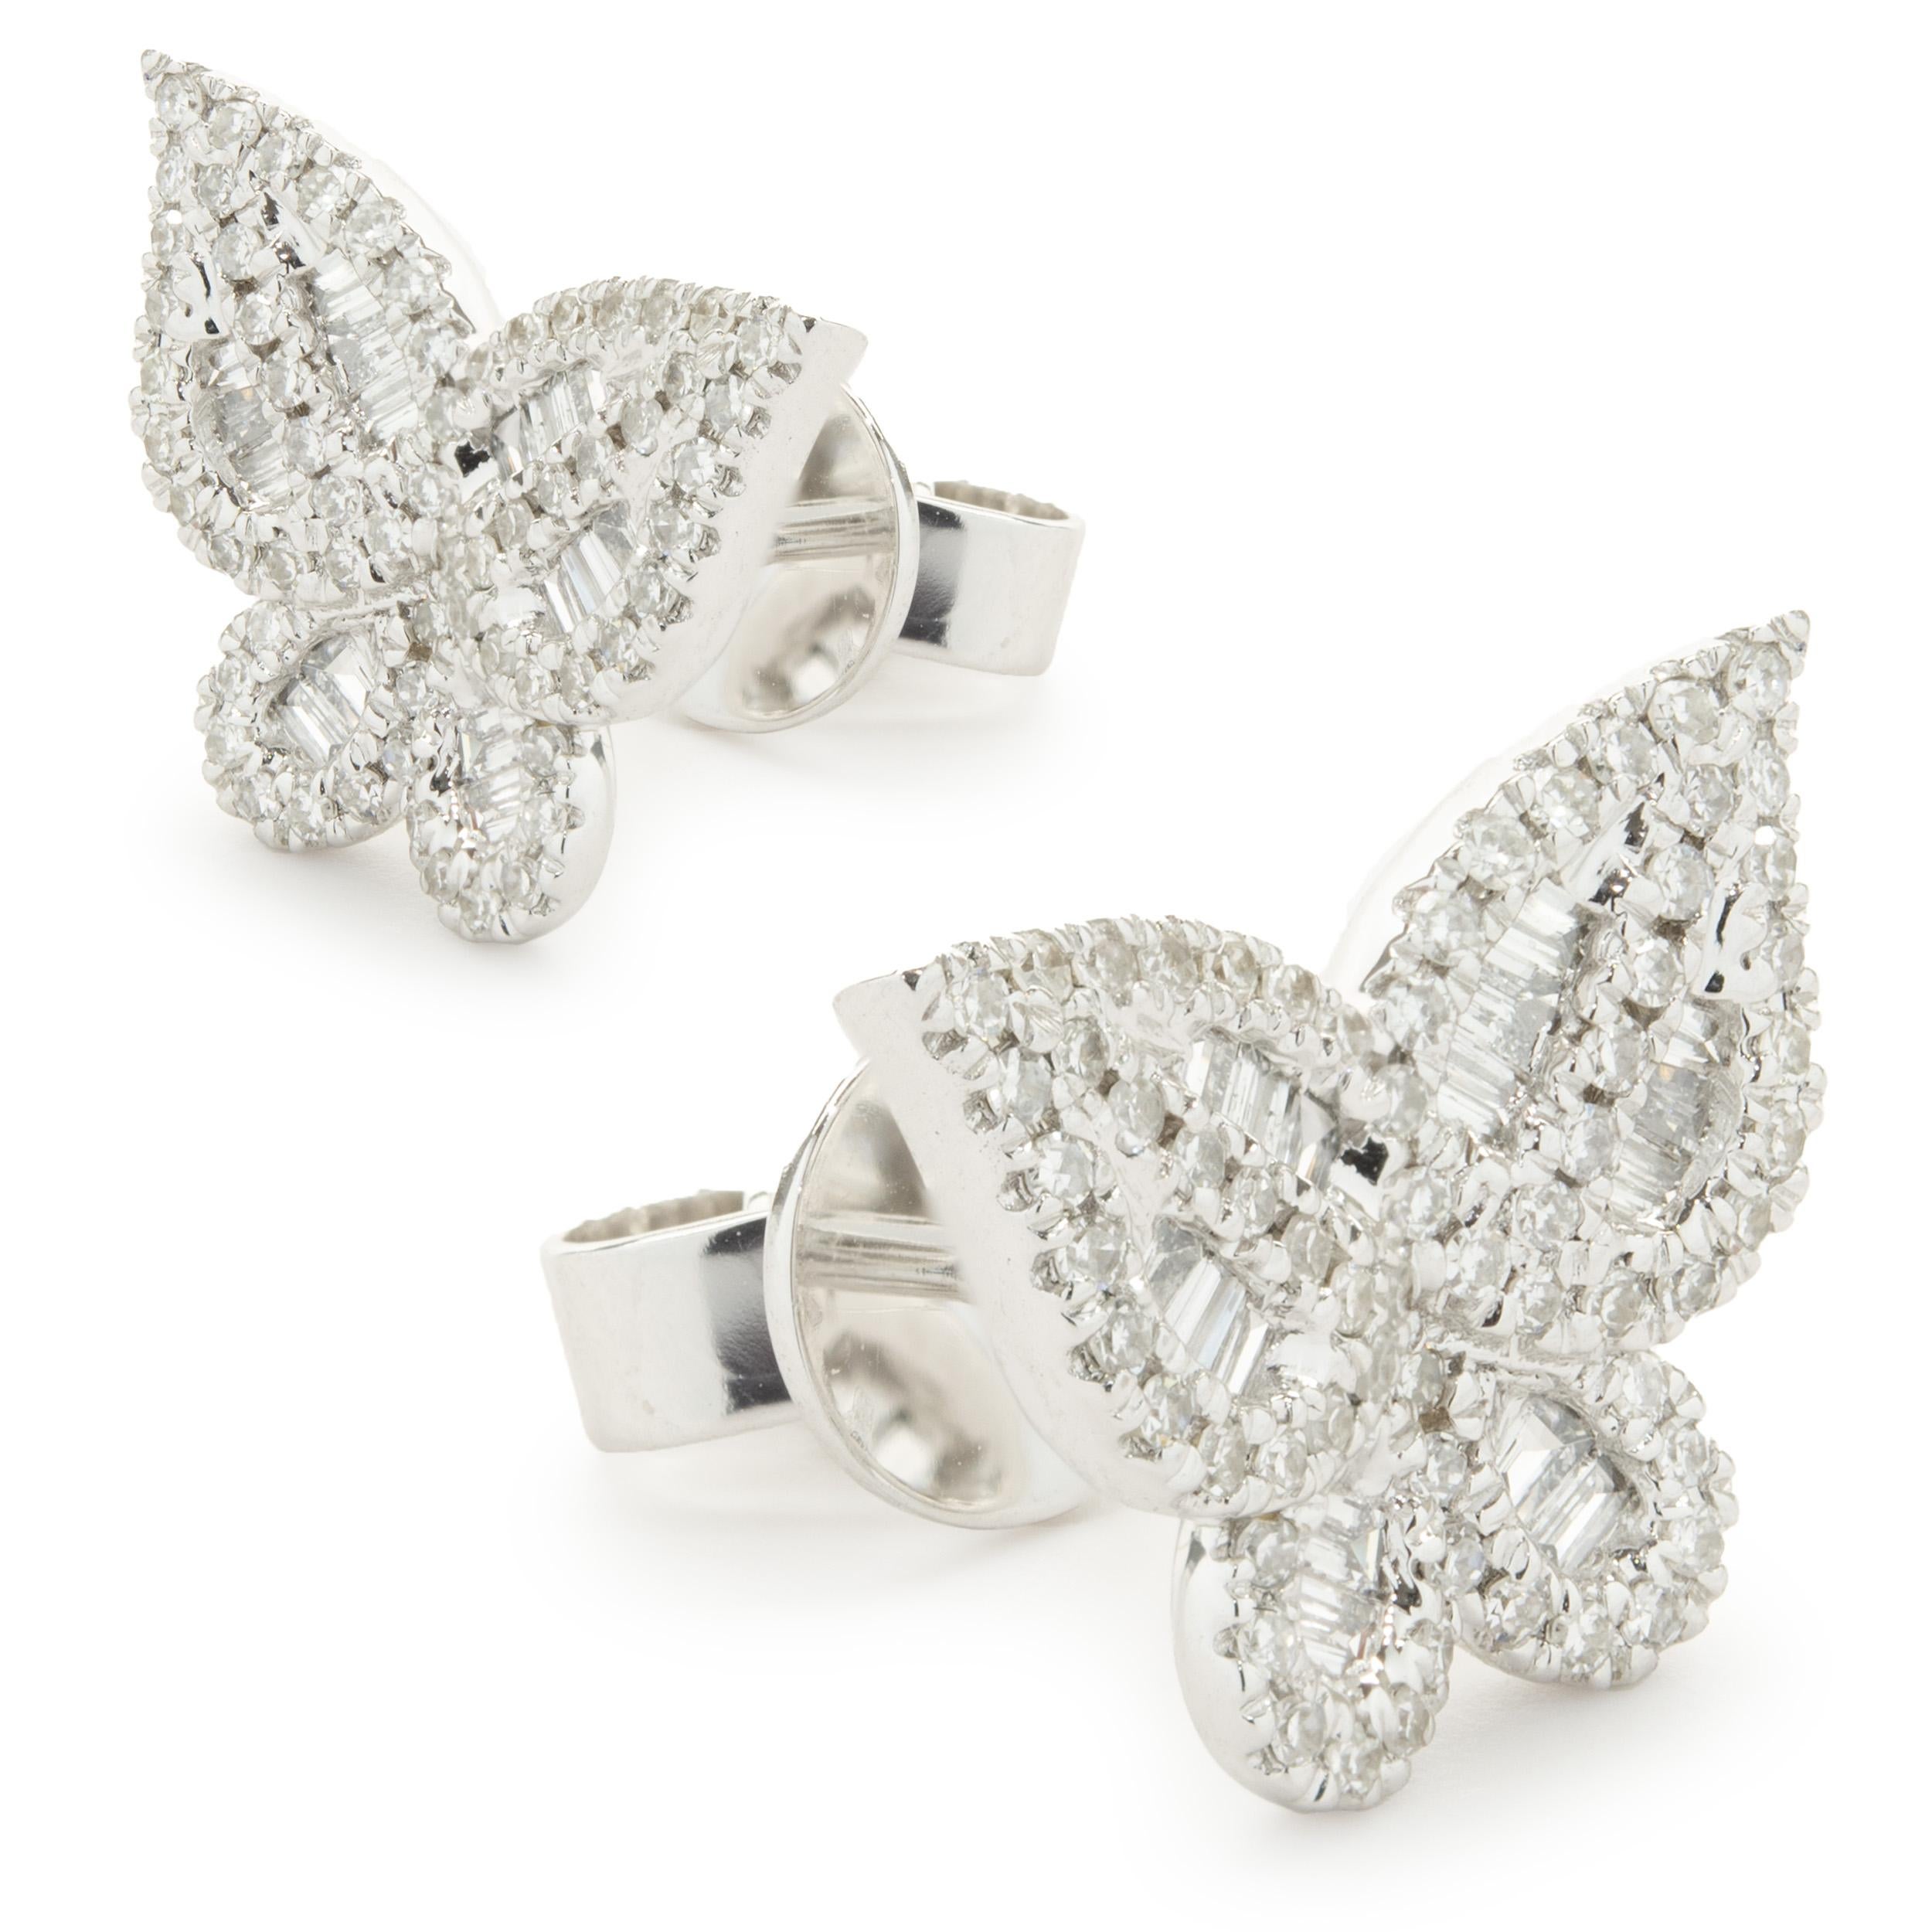 Designer: custom design
Material: 14K white gold
Diamonds: 158 round and baguette cut = 0.47cttw
Color: G
Clarity: SI1
Dimensions: earrings measure 10 x 12.5mm
Weight: 3.00 grams